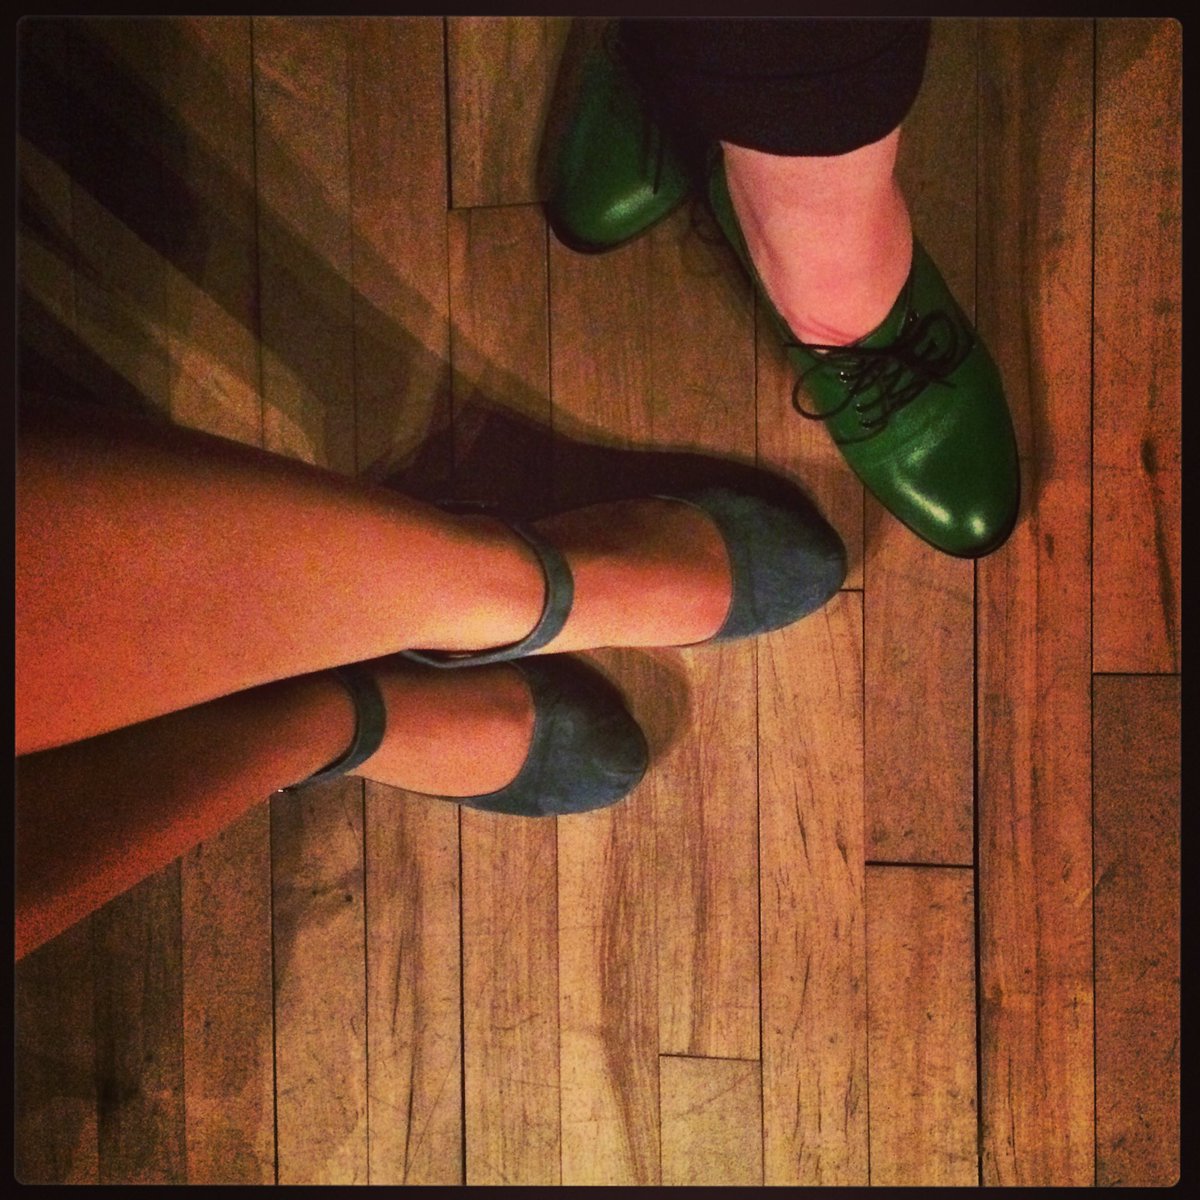 Green with envy? #conferenceshoetweet #oer16 https://t.co/9Dcil0zYho